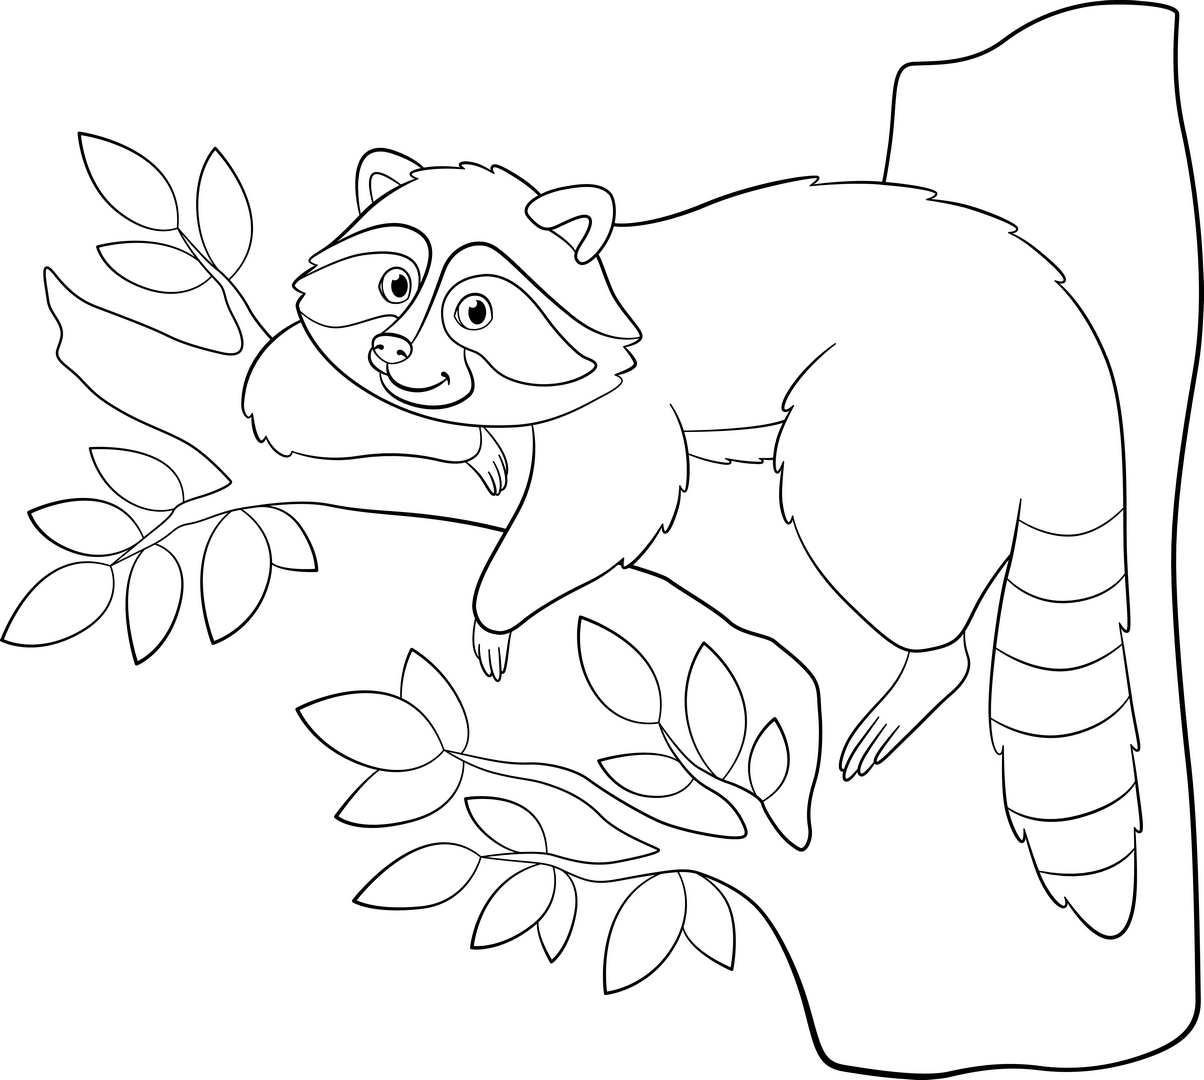 Raccoon01 03 coloring page